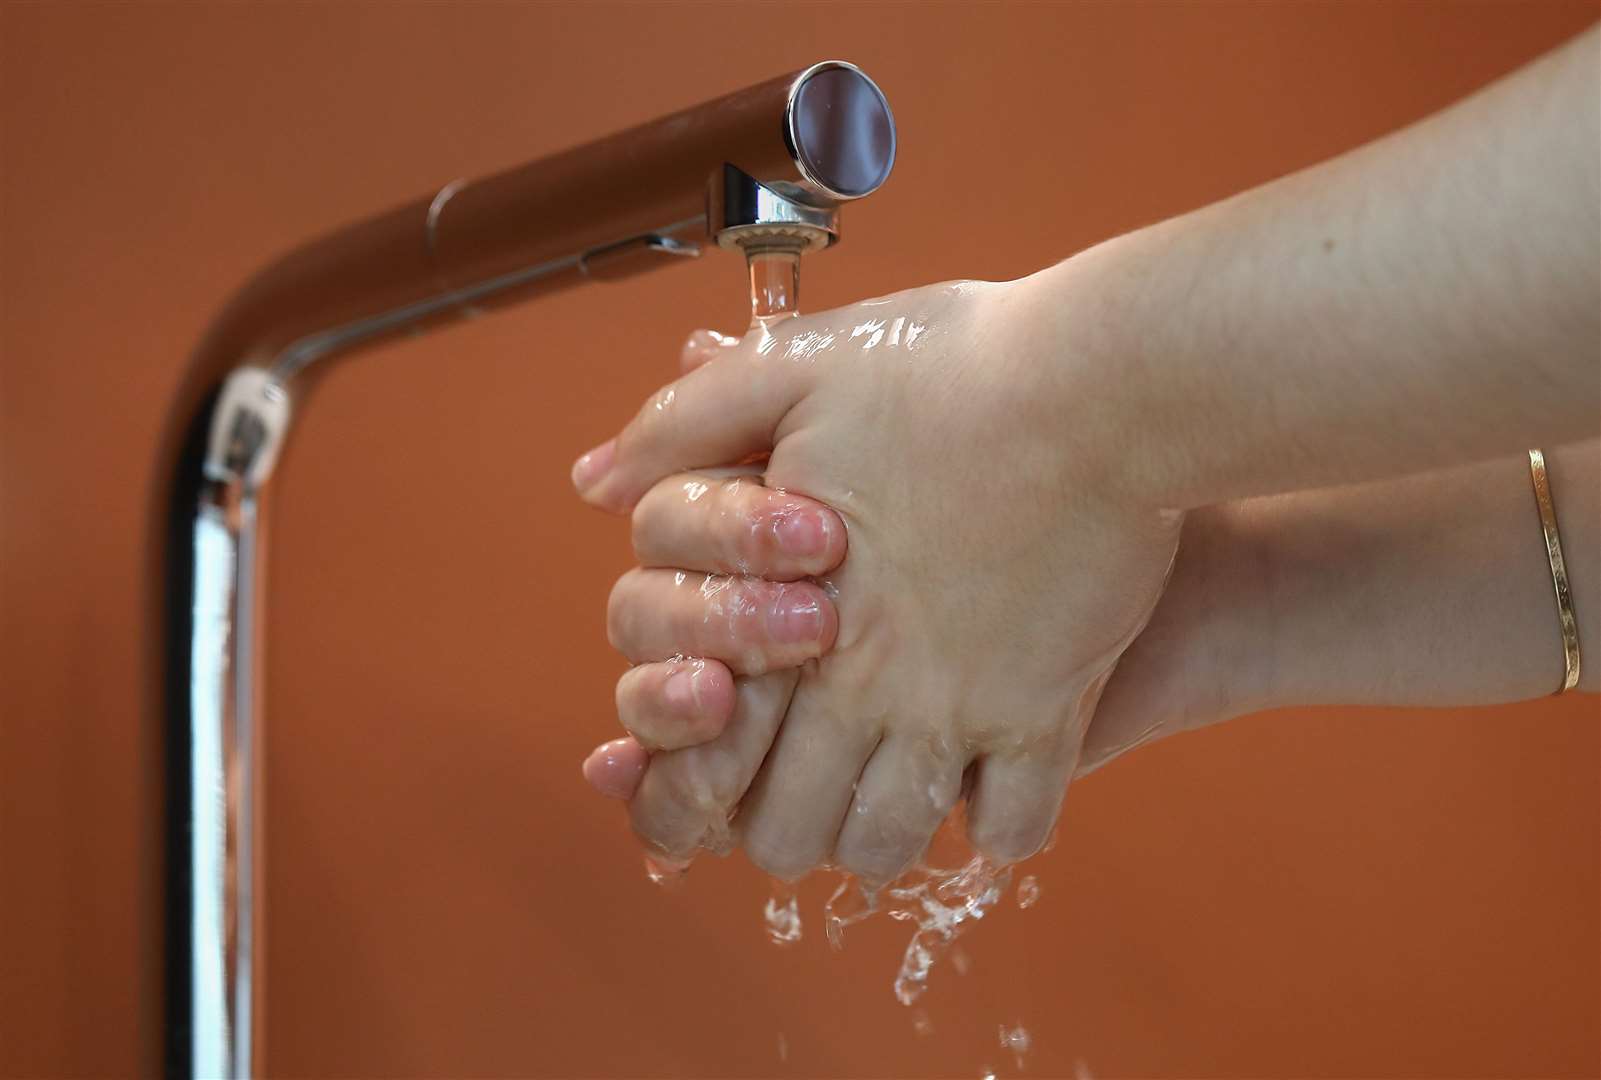 Maintaining stricter hand-washing regimes could prevent the spread of other germs (Philip Toscano/PA)